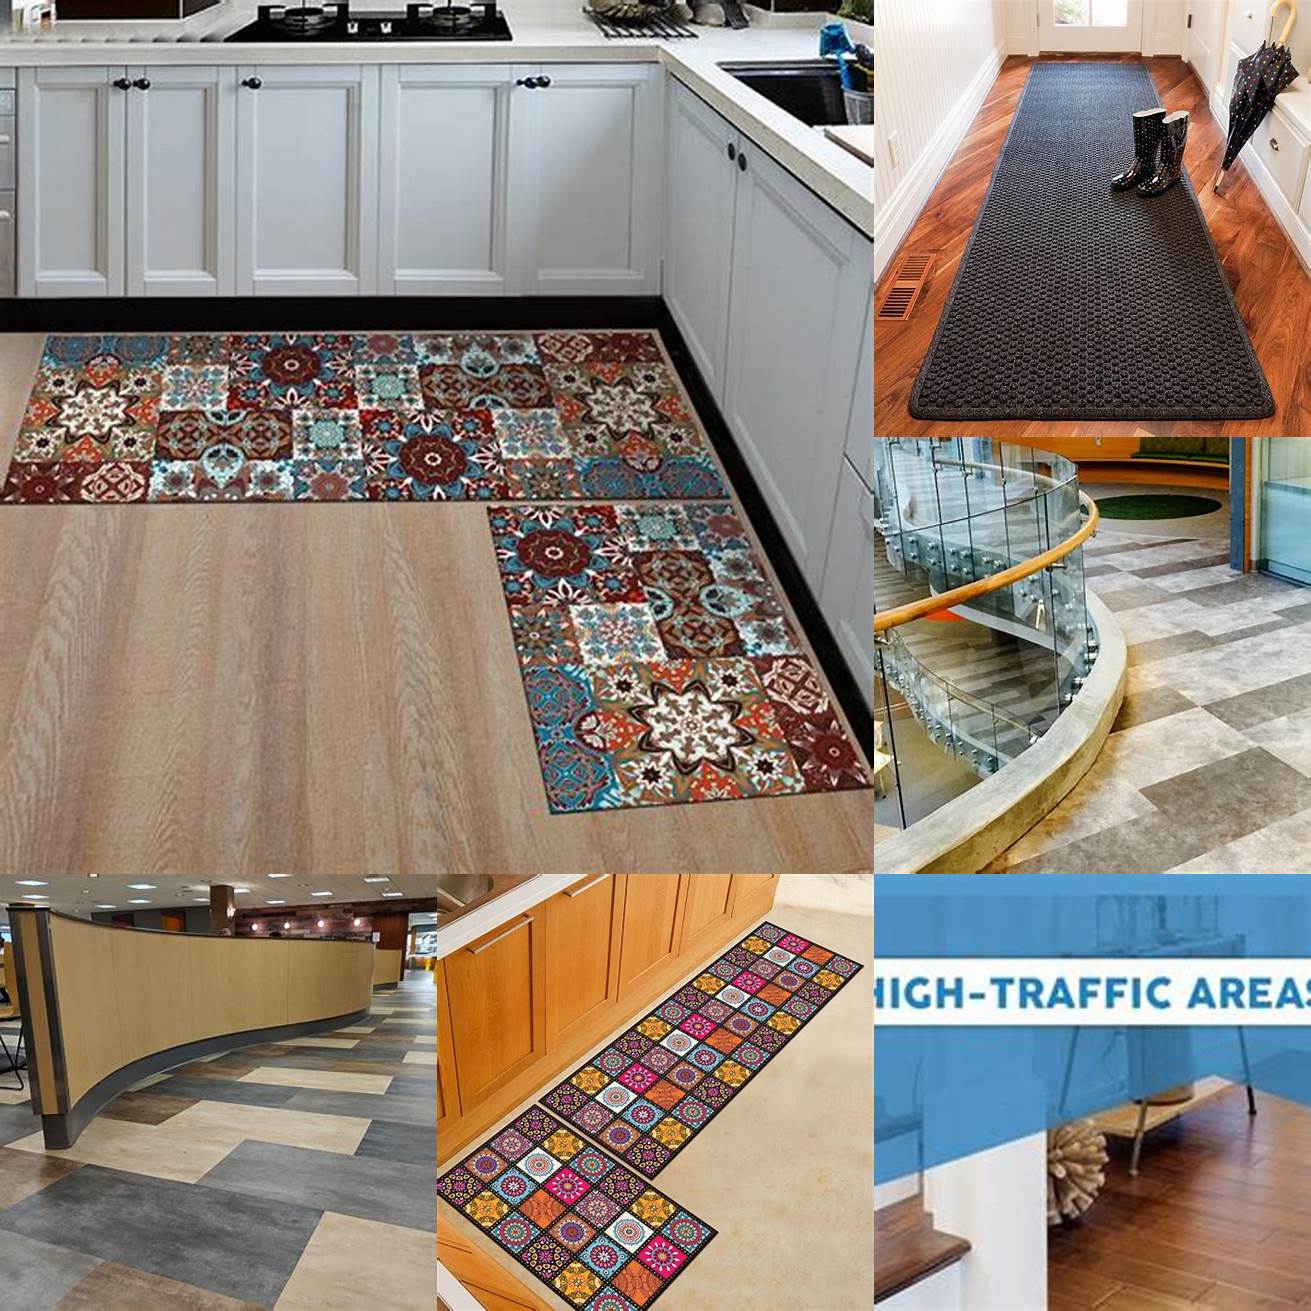 Protects floors - High traffic areas like the kitchen can cause wear and tear on your floors A kitchen floor mat can protect your floors from scratches stains and dents